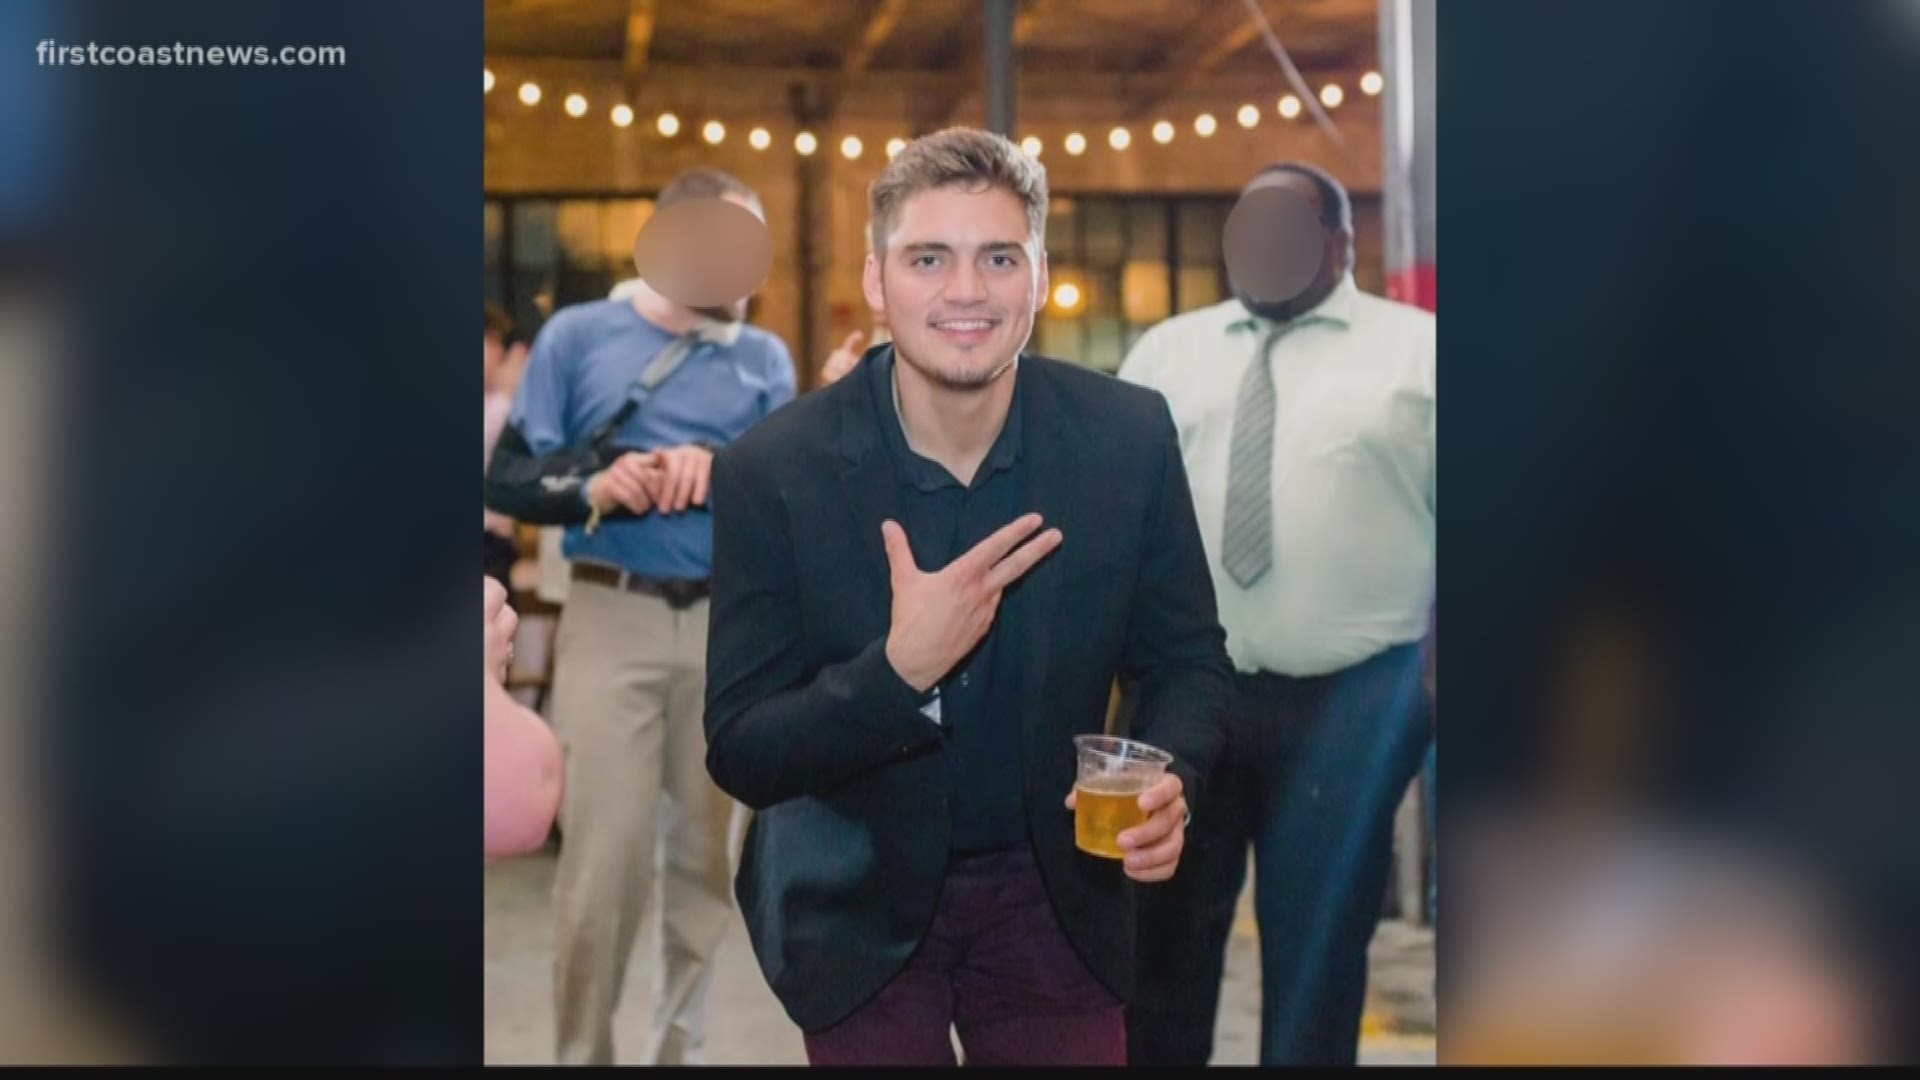 Friends said Blake Hendrix, 23, was the man killed and family members have confirmed on Facebook with tributes to the victim.